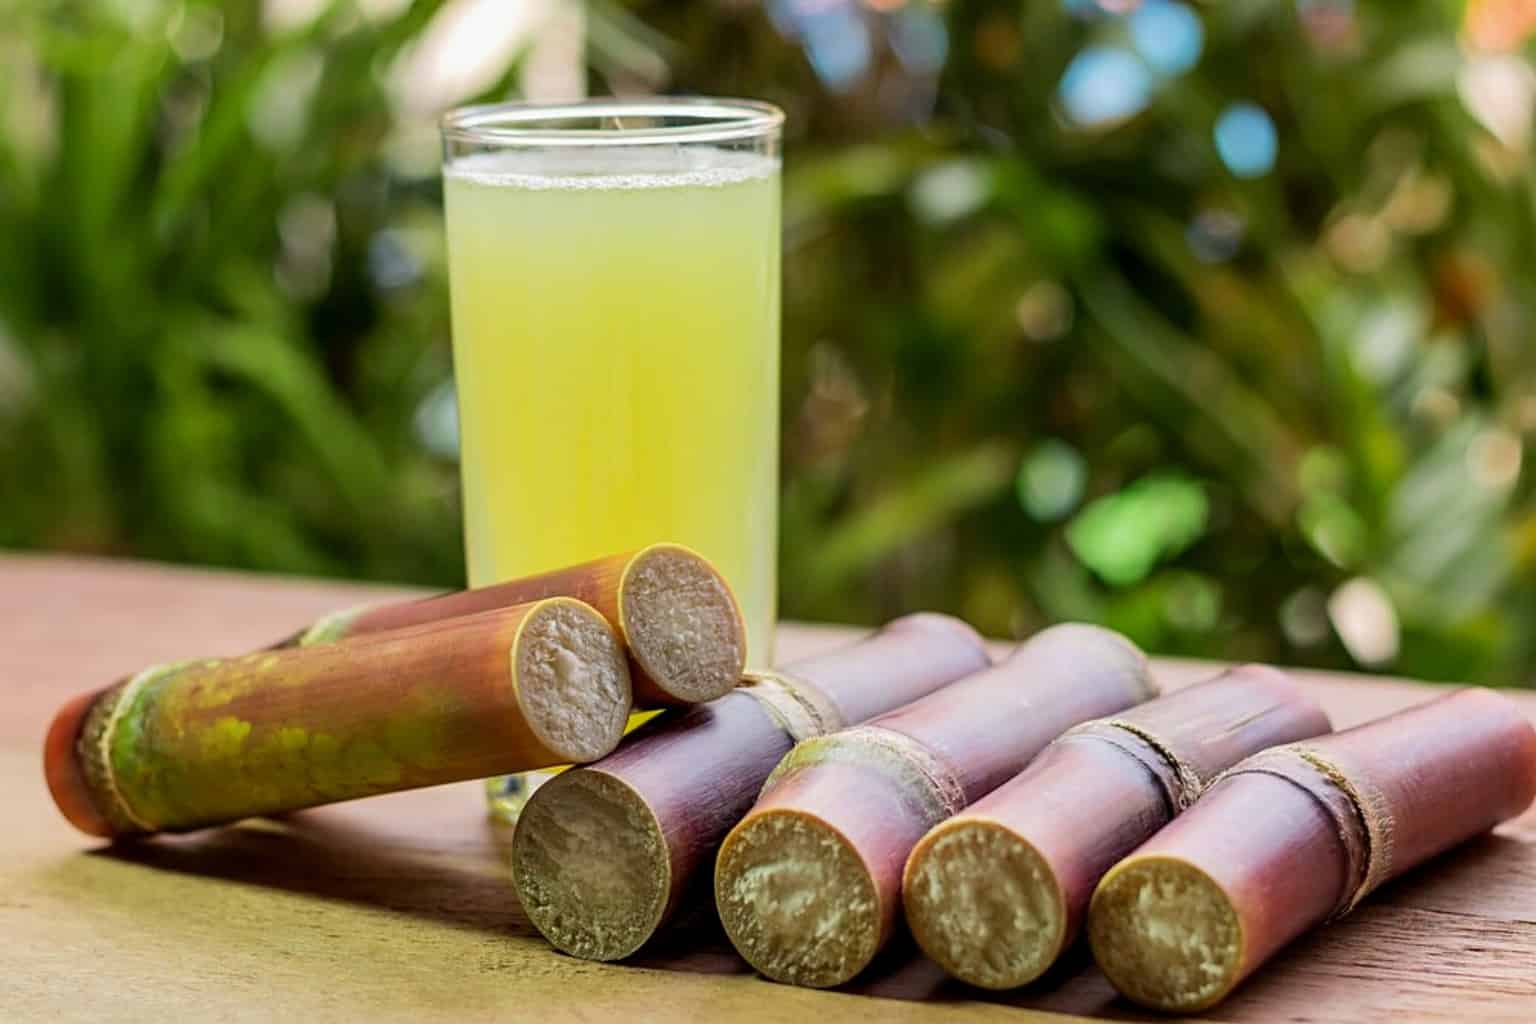 Sugarcane Juice - Nutrition, Recipes, and Benefits Including Weight Loss